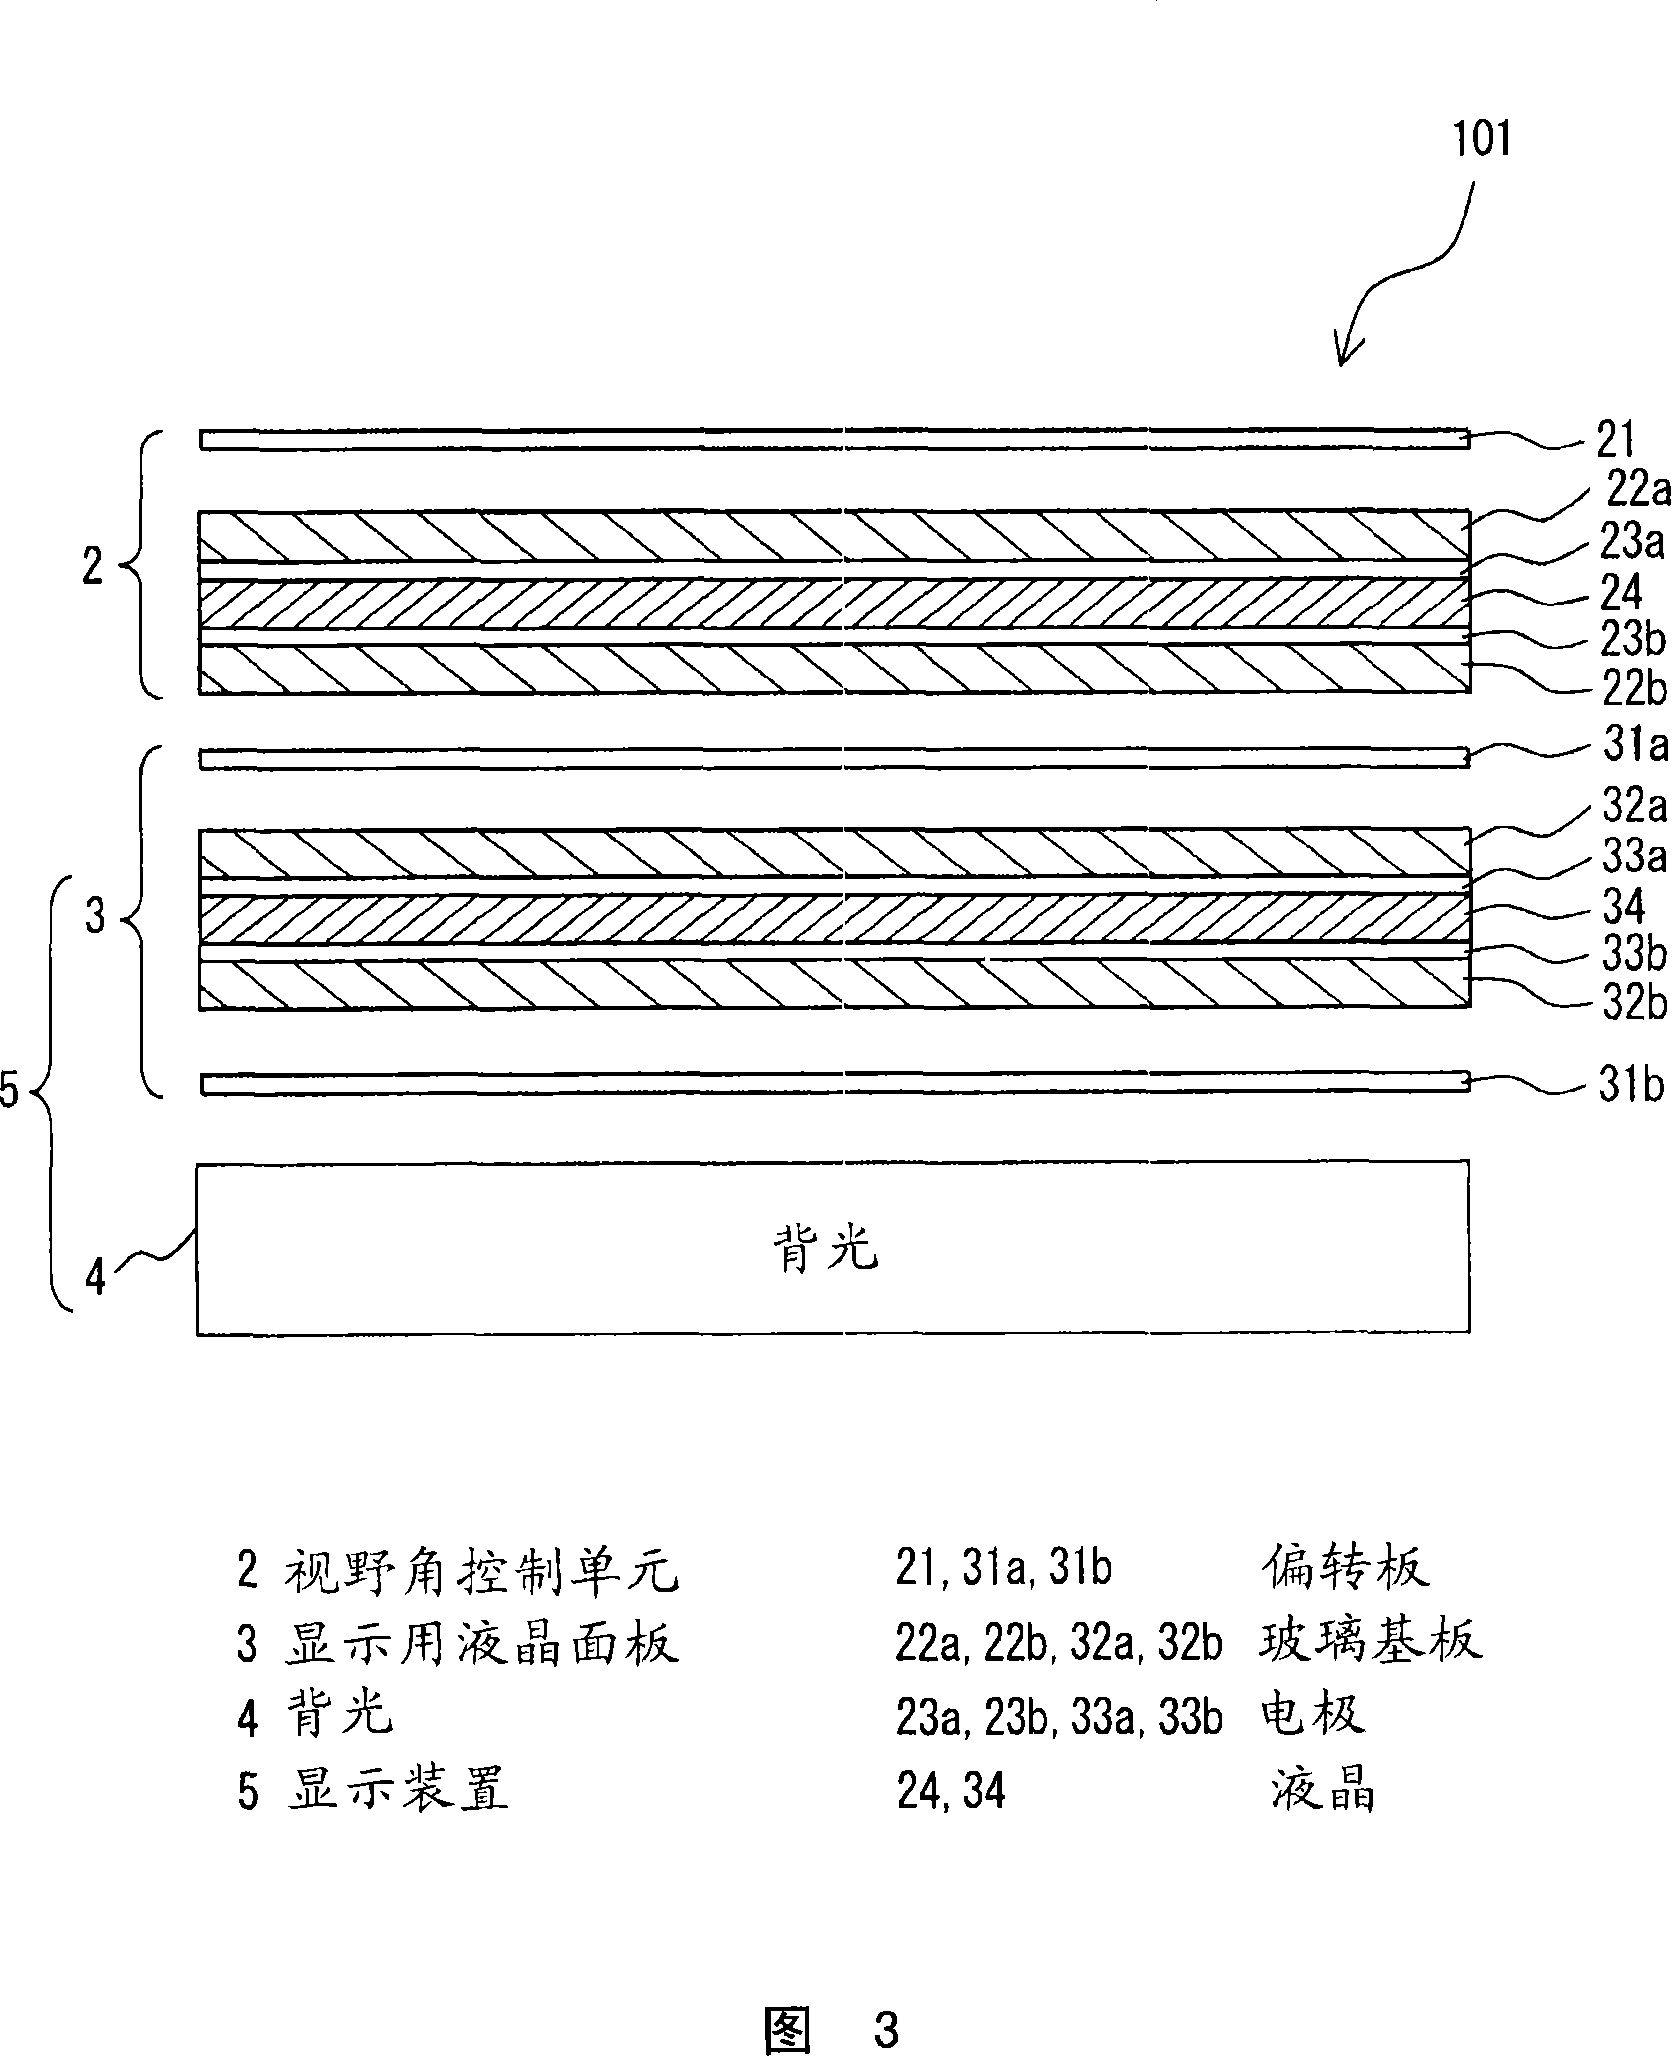 Mobile information terminal device, and display terminal device